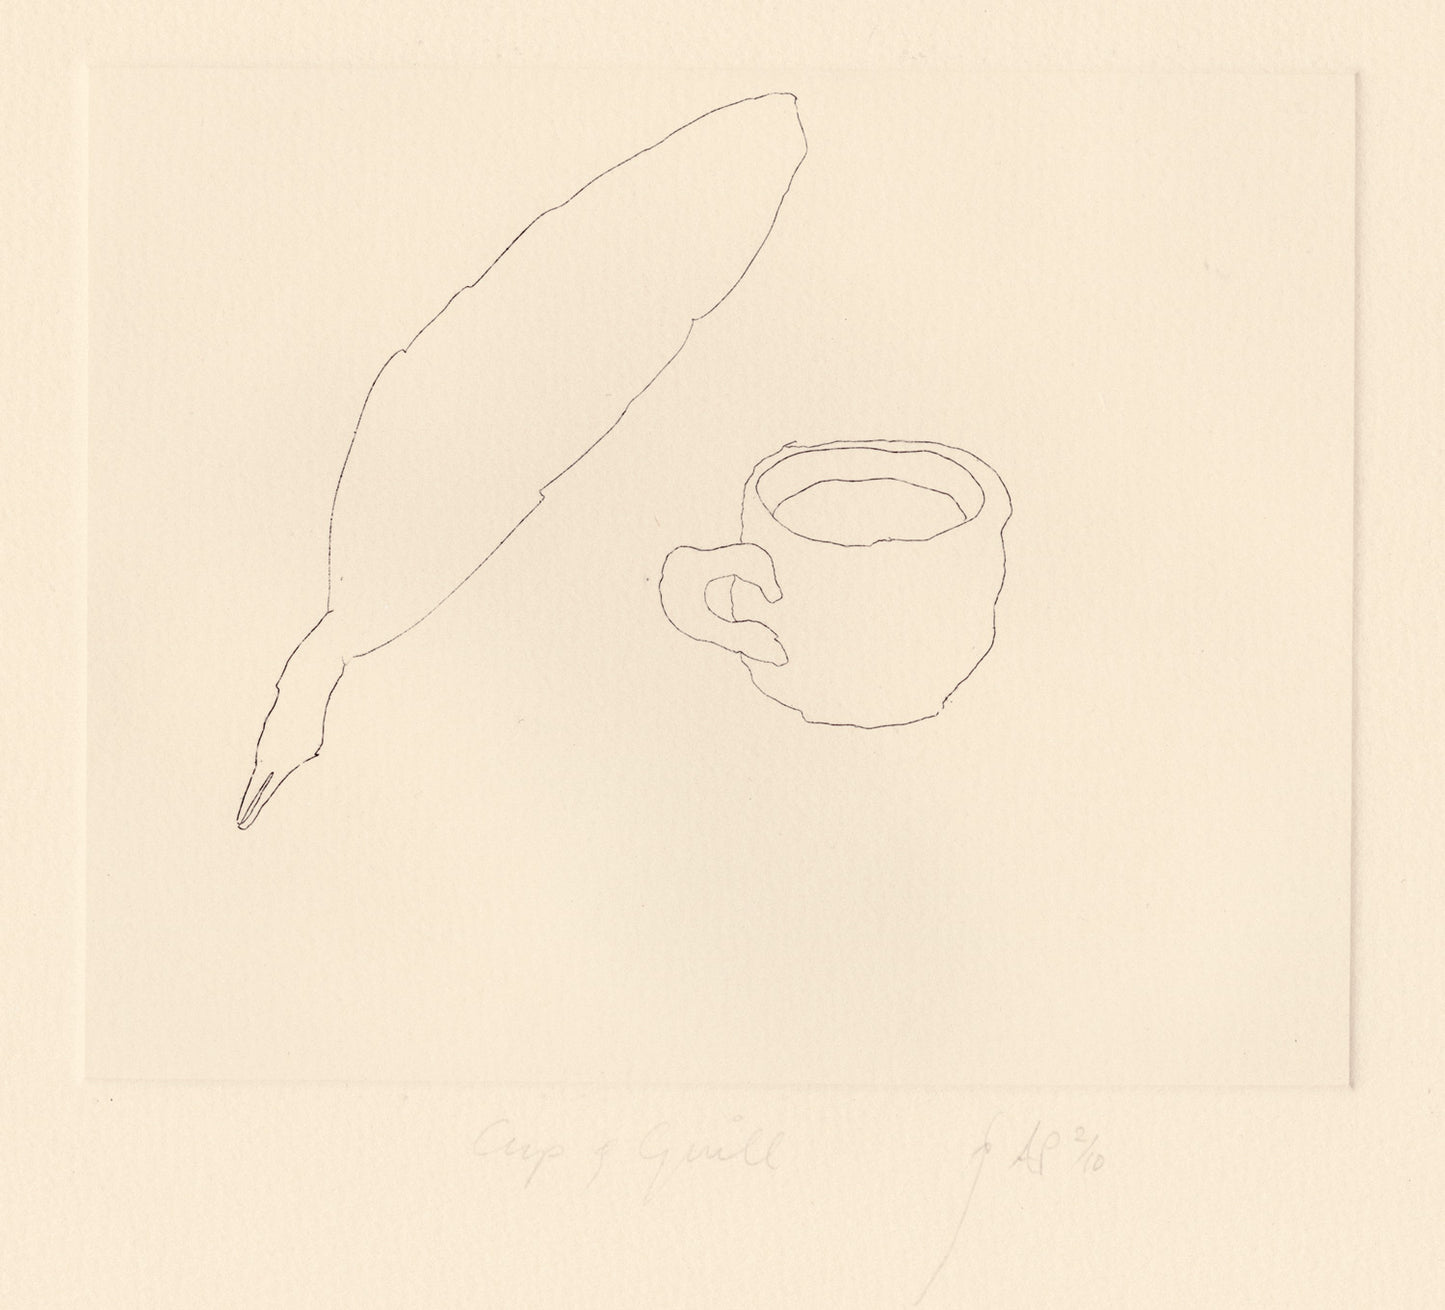 Cup and Quill